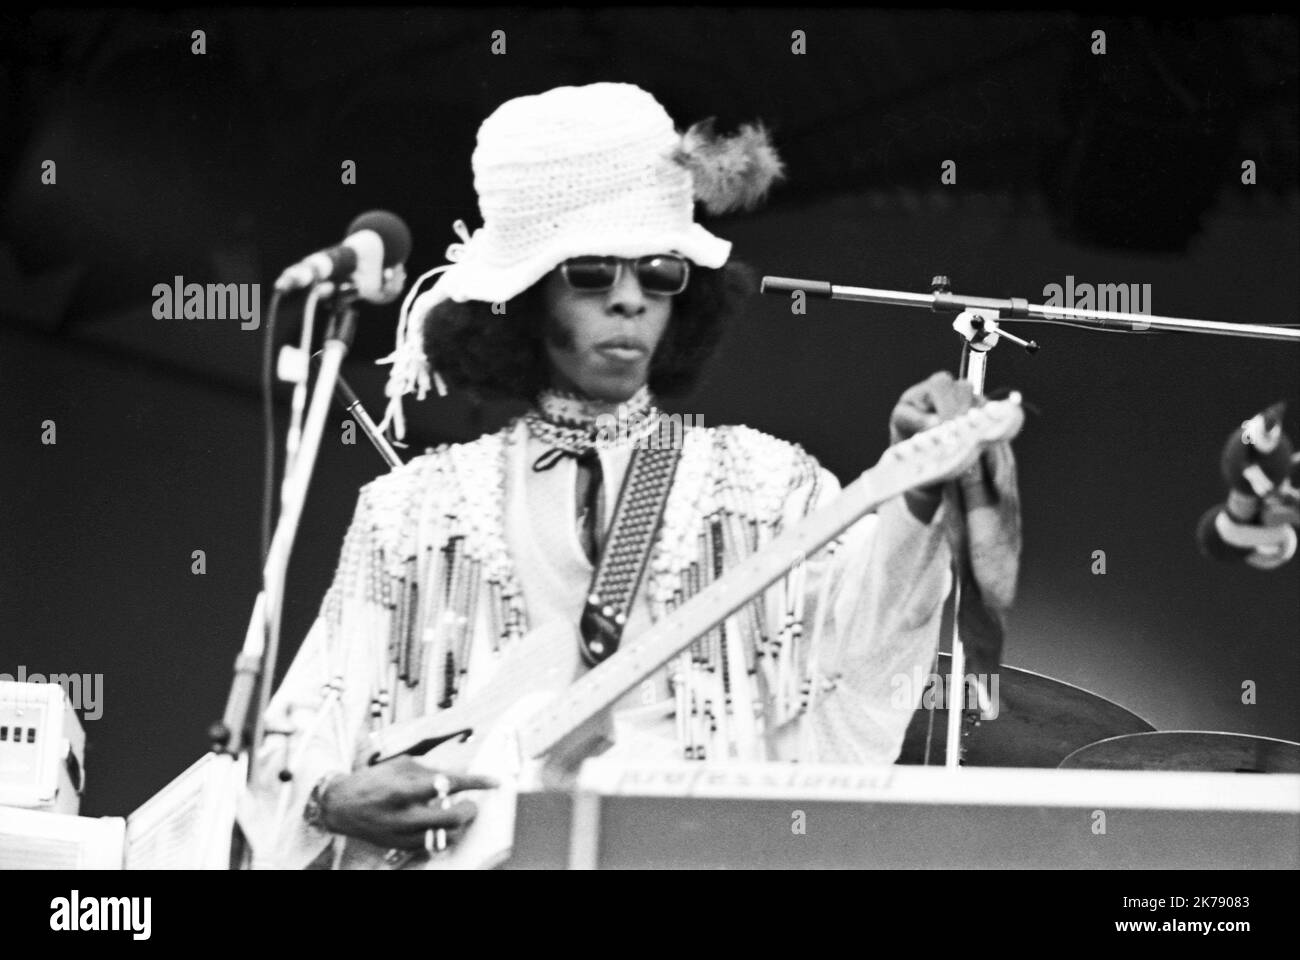 / 29/08/1970  -  United Kingdom / England / Isle of Wight  -  The group Sly and the Family Stone during the famous Isle of Wight festival in 1970, it is estimated that between 600 and 700,000 people attended. Saturday 29 August 1970 Stock Photo